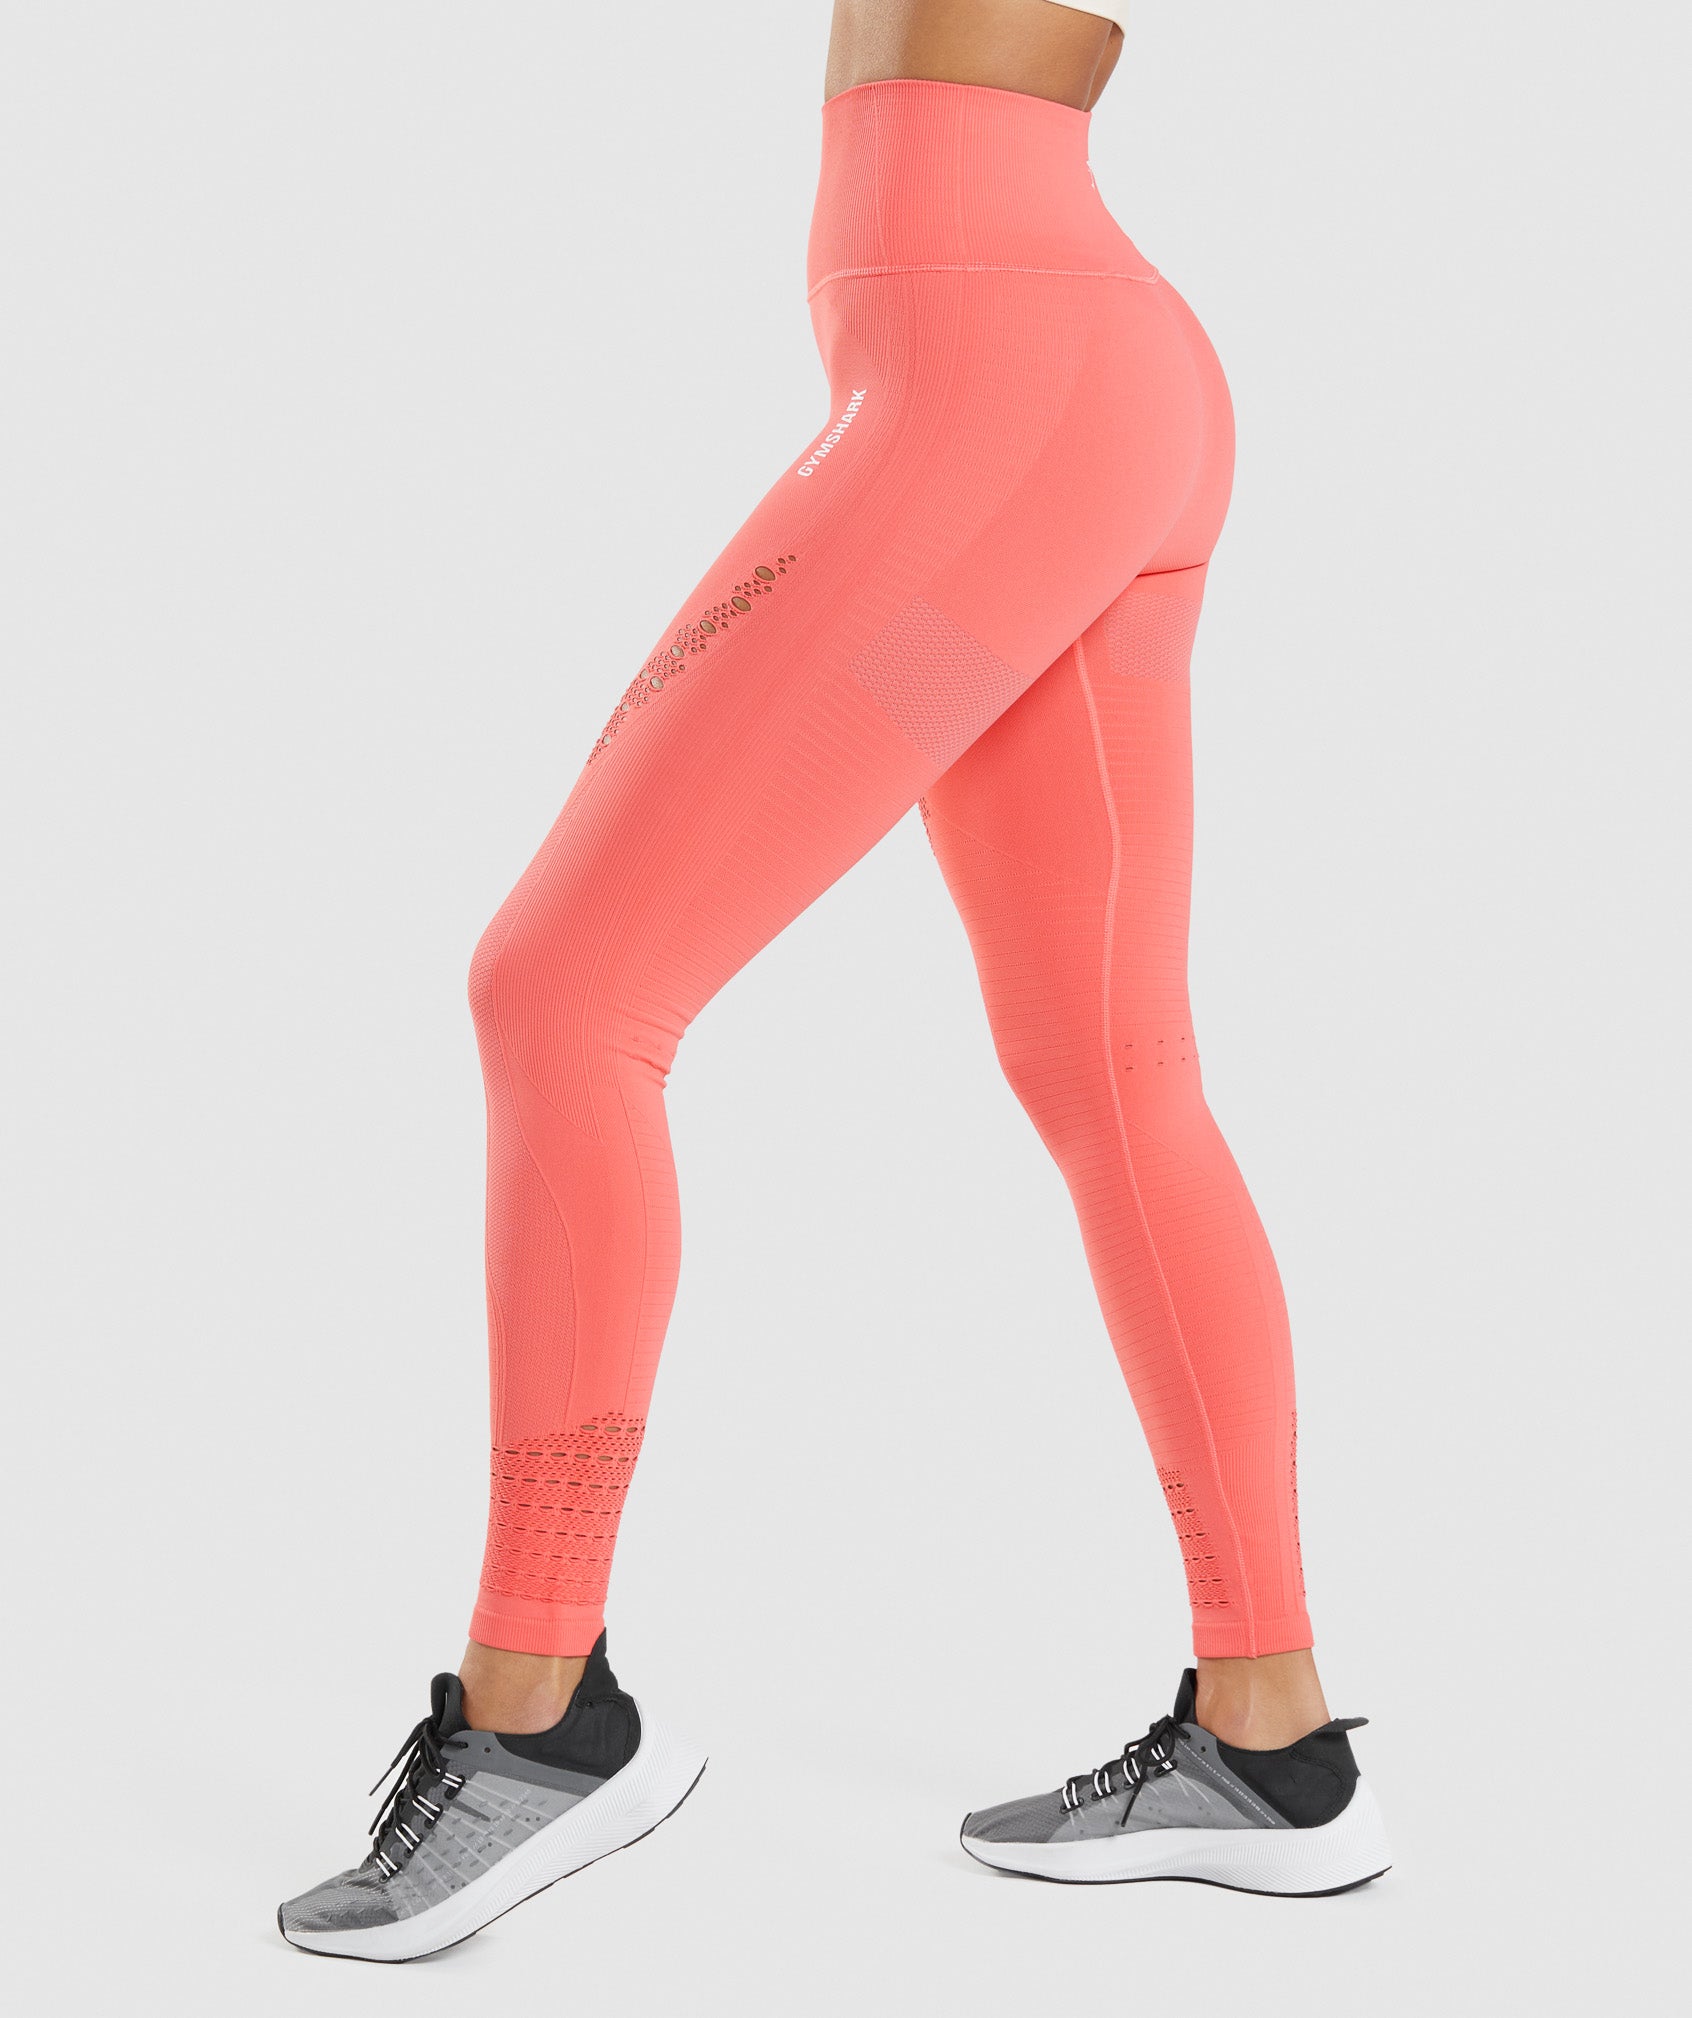 Gymshark Energy Seamless Leggings Tights Purple size XS - $31 - From Rebecca